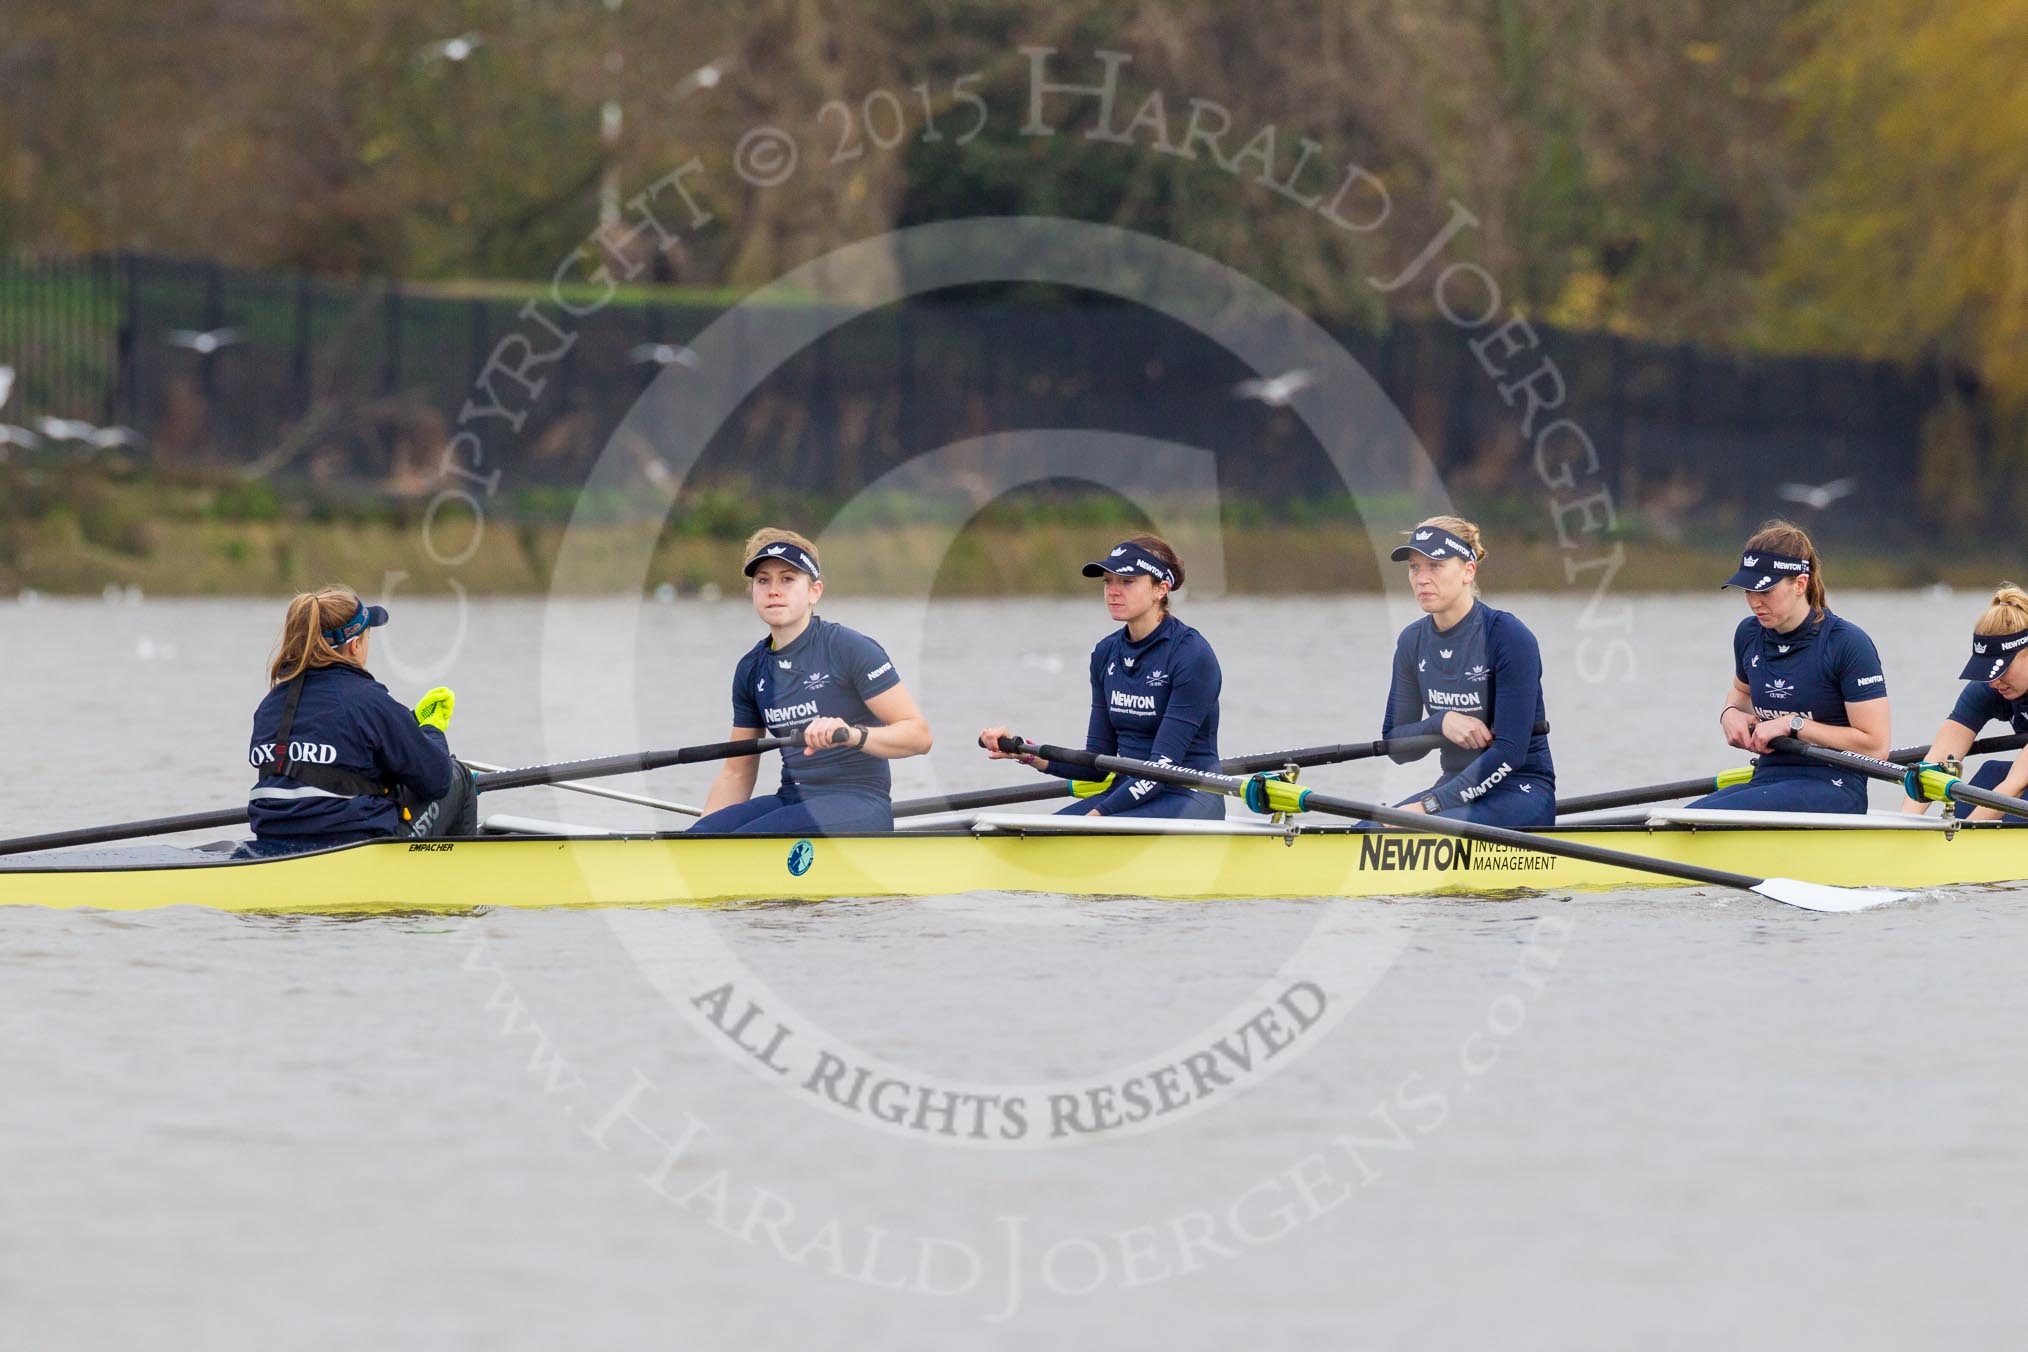 The Boat Race season 2016 - Women's Boat Race Trial Eights (OUWBC, Oxford): "Charybdis" waiting for the start of the race, here cox-Morgan Baynham-Williams, stroke-Kate Erickson, 7-Maddy Badcott, 6-Elo Luik, 5-Ruth Siddorn, 4-Emma Spruce.
River Thames between Putney Bridge and Mortlake,
London SW15,

United Kingdom,
on 10 December 2015 at 12:15, image #126